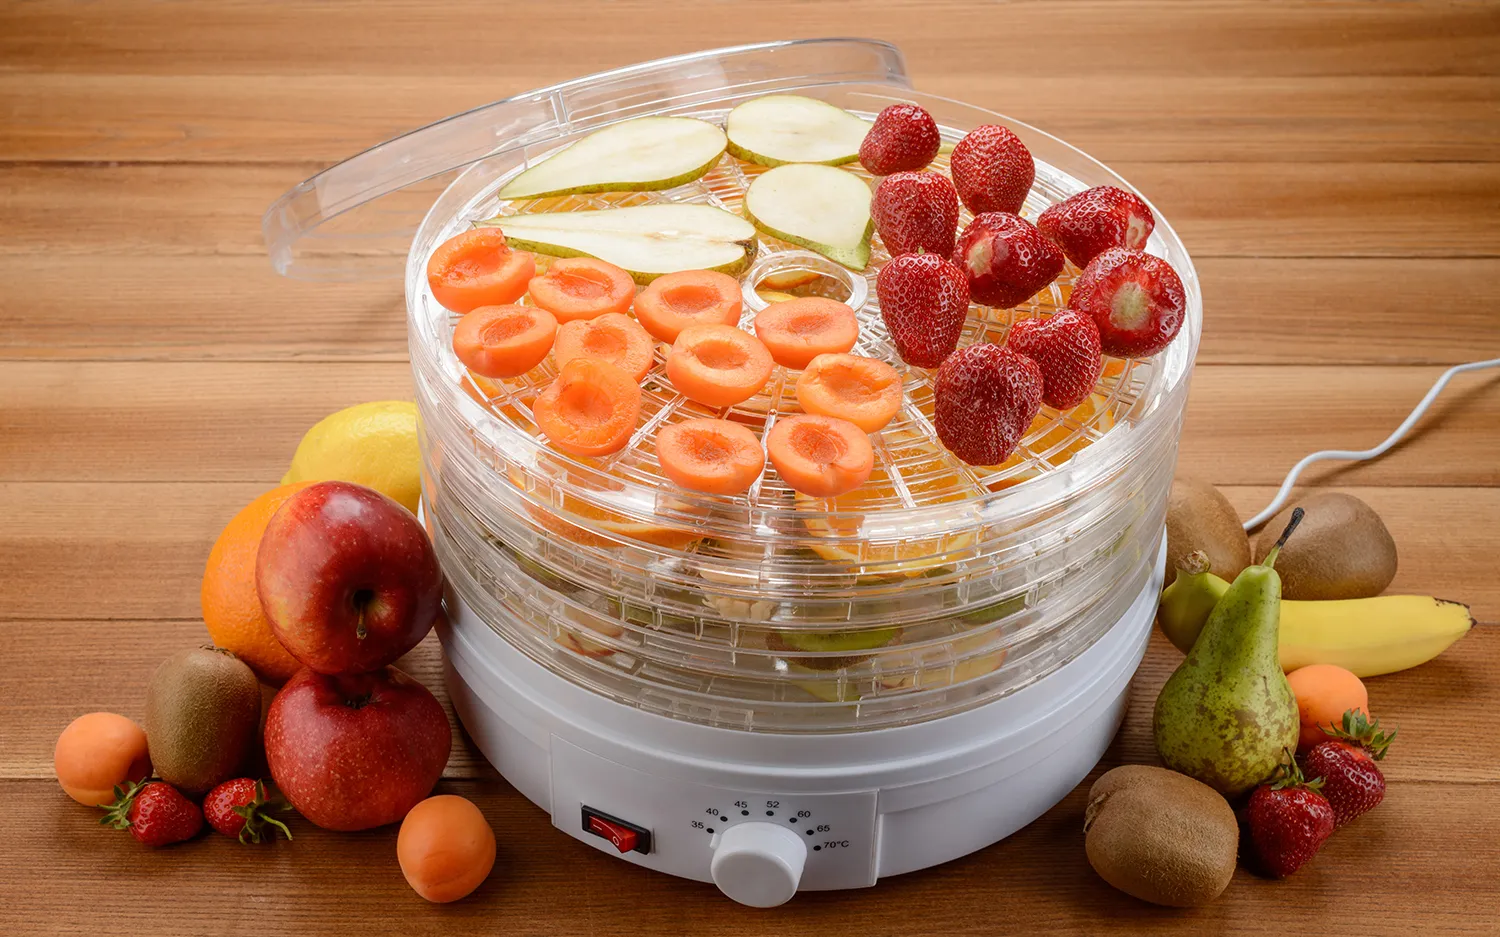 The Ultimate Vegetable Dehydrator Comparison: Make an Informed Choice